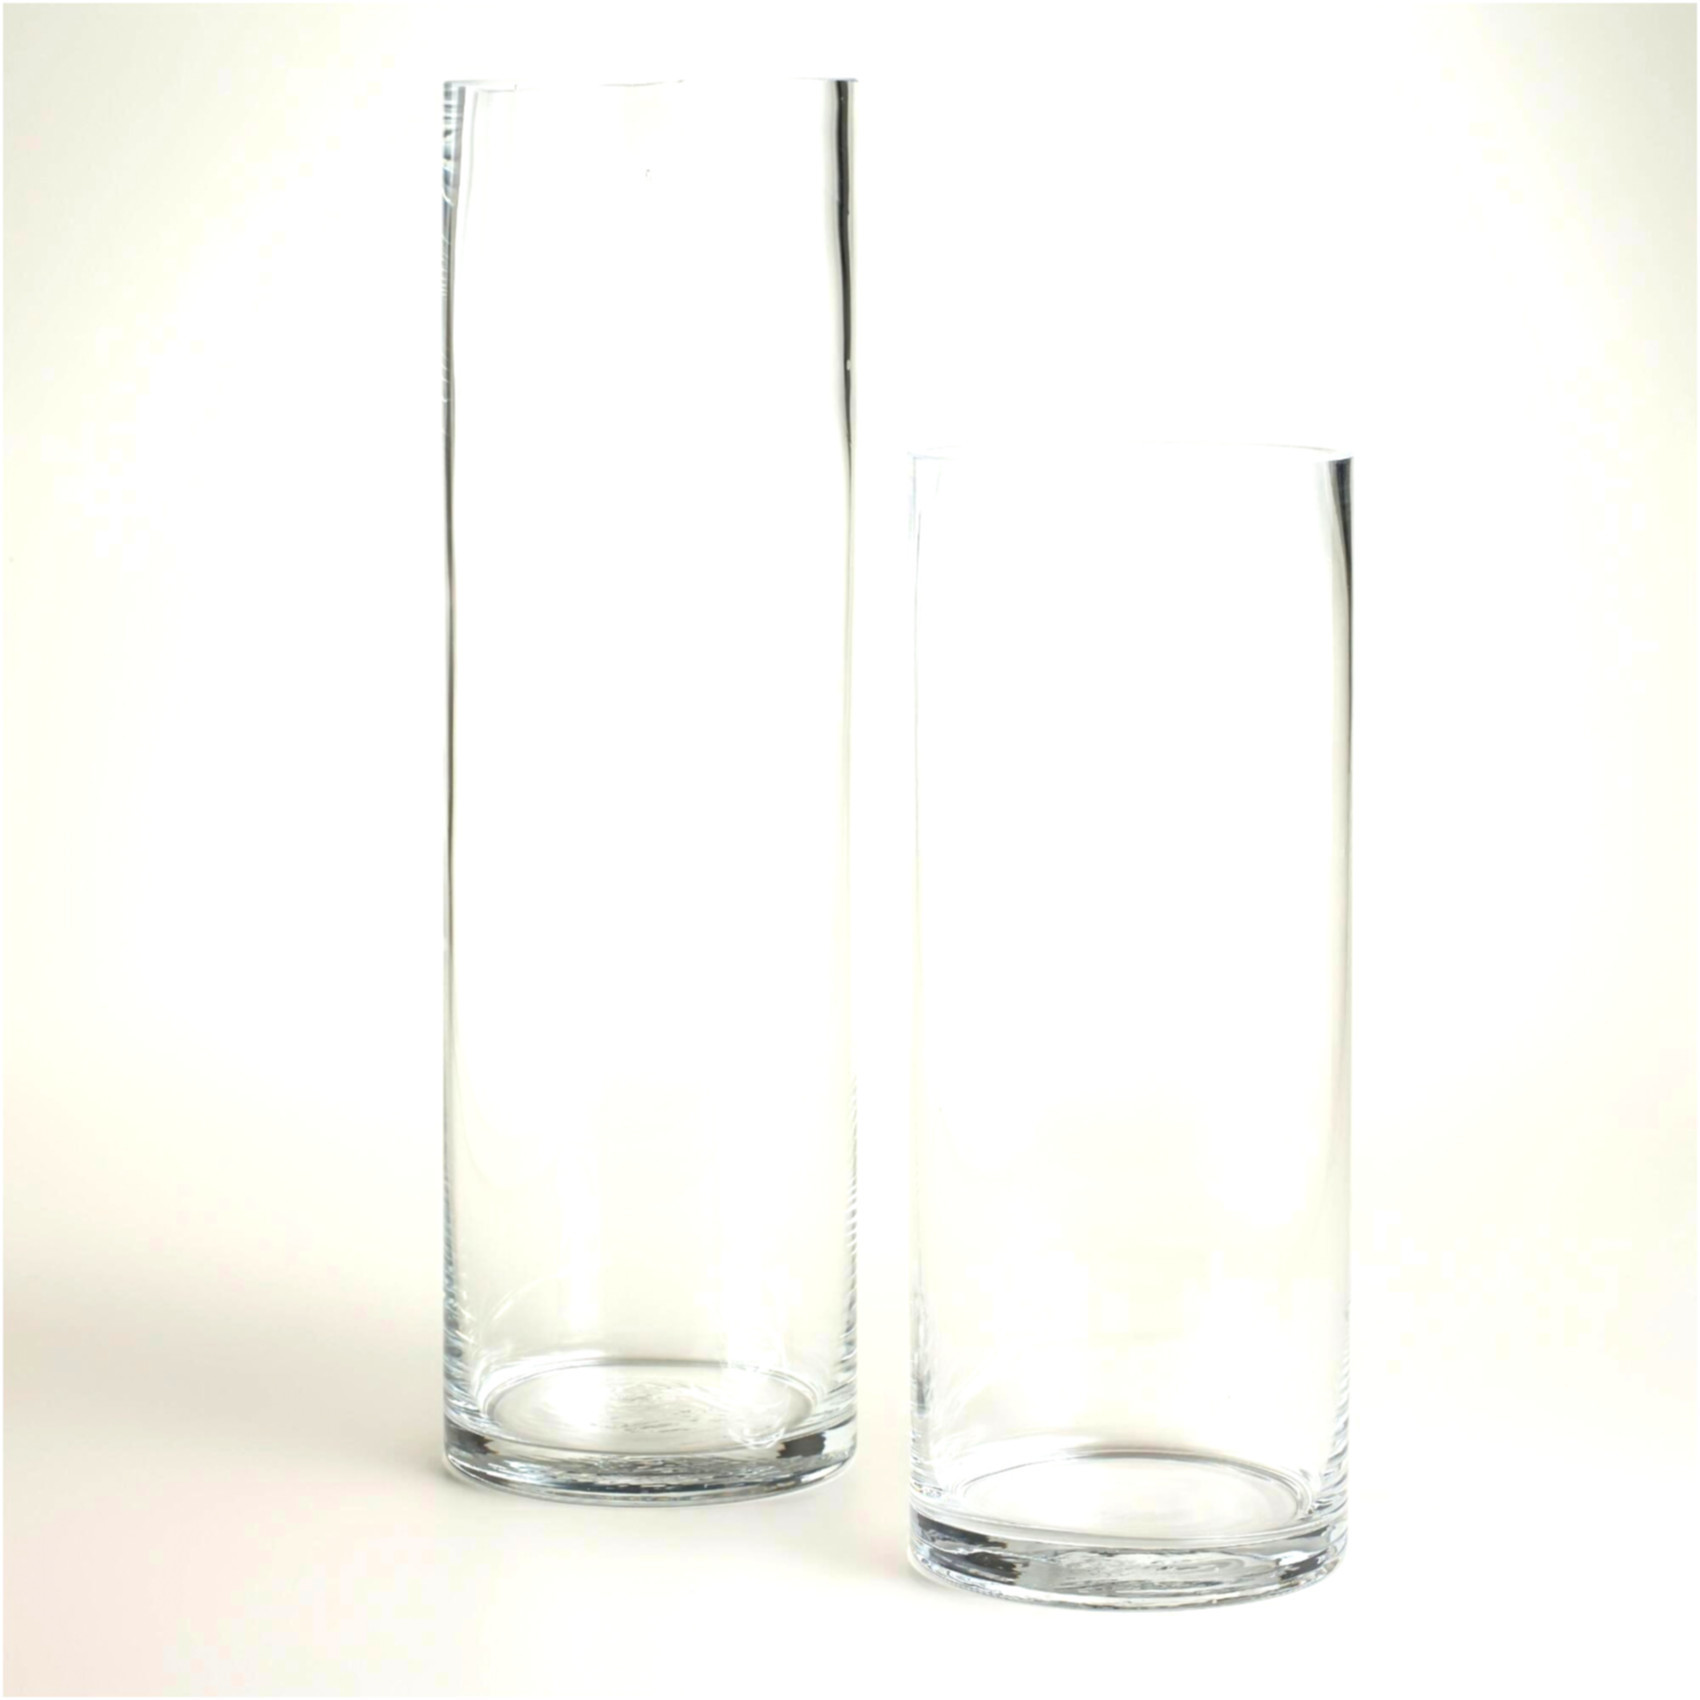 12 Best 3 Size Cylinder Vases 2024 free download 3 size cylinder vases of why you should not go to glass vases wholesale glass vases intended for crystal glass vases wholesale inspirational 30 elegant vases with